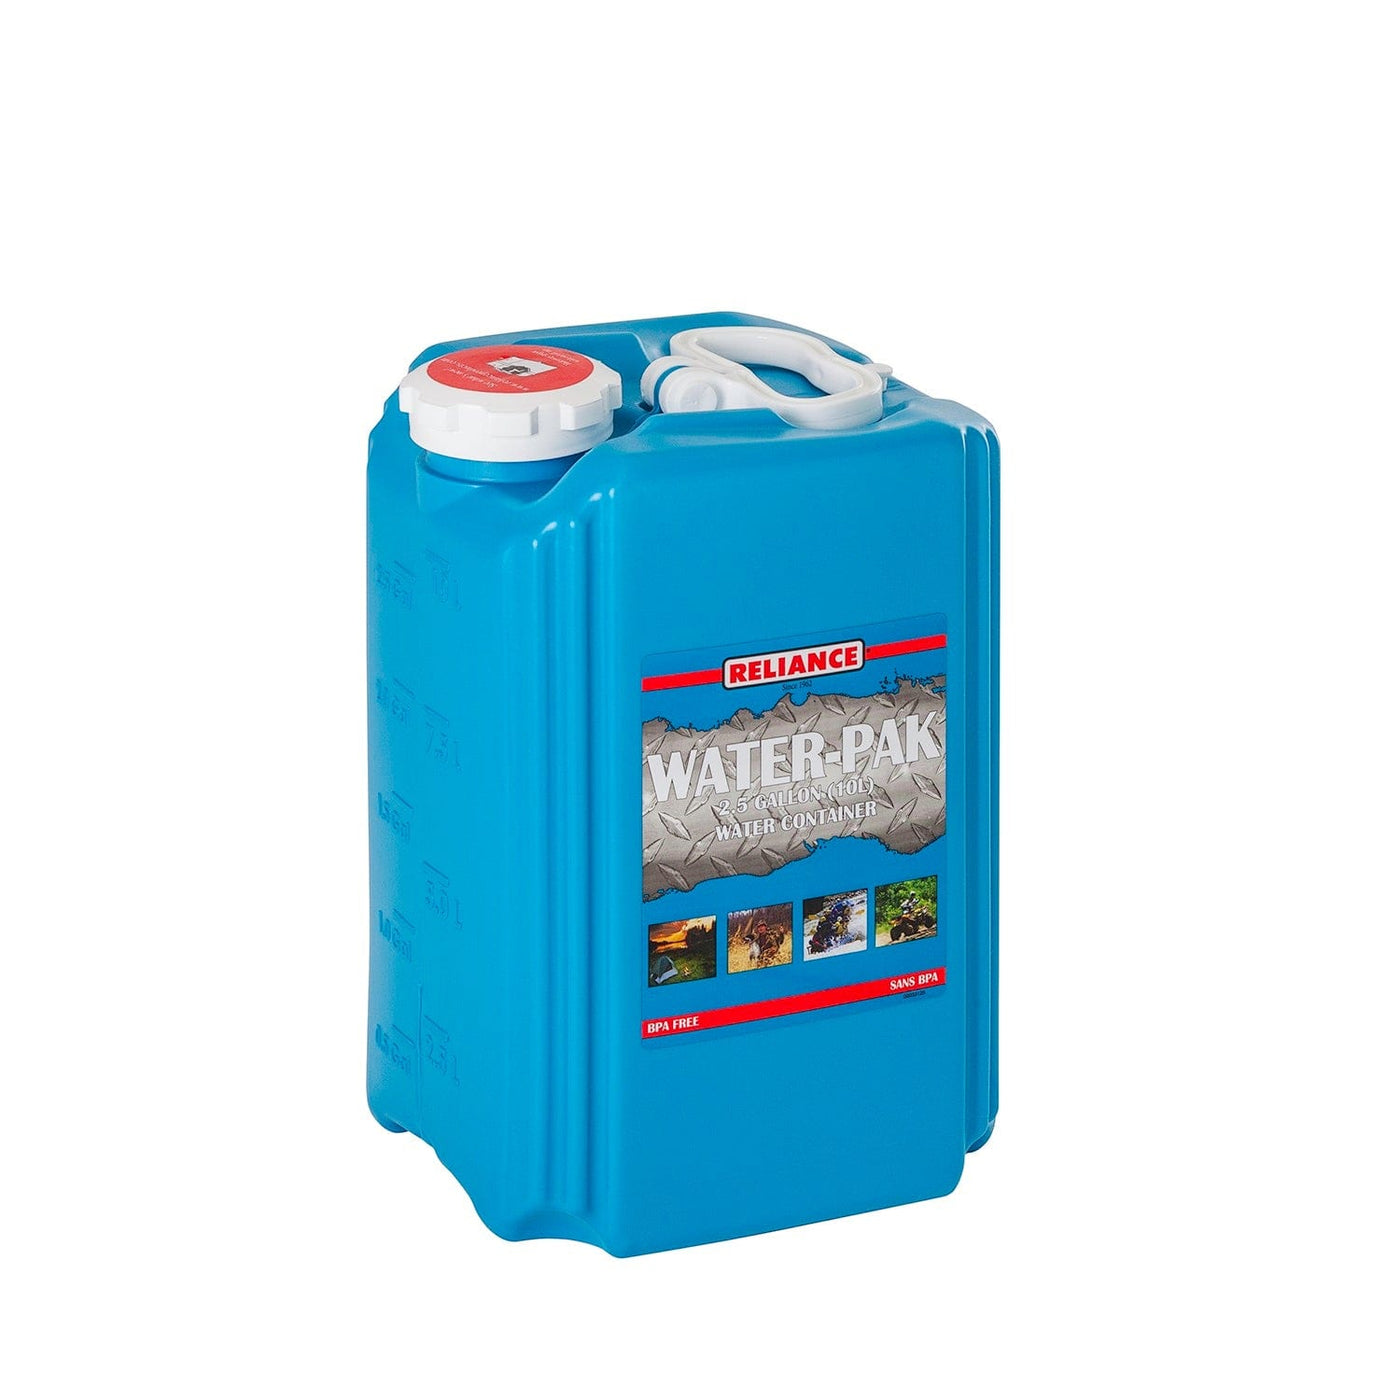 Reliance Reliance Aqua-Pak Water Container 5 Gallon 2.5 Gallon Camping And Outdoor